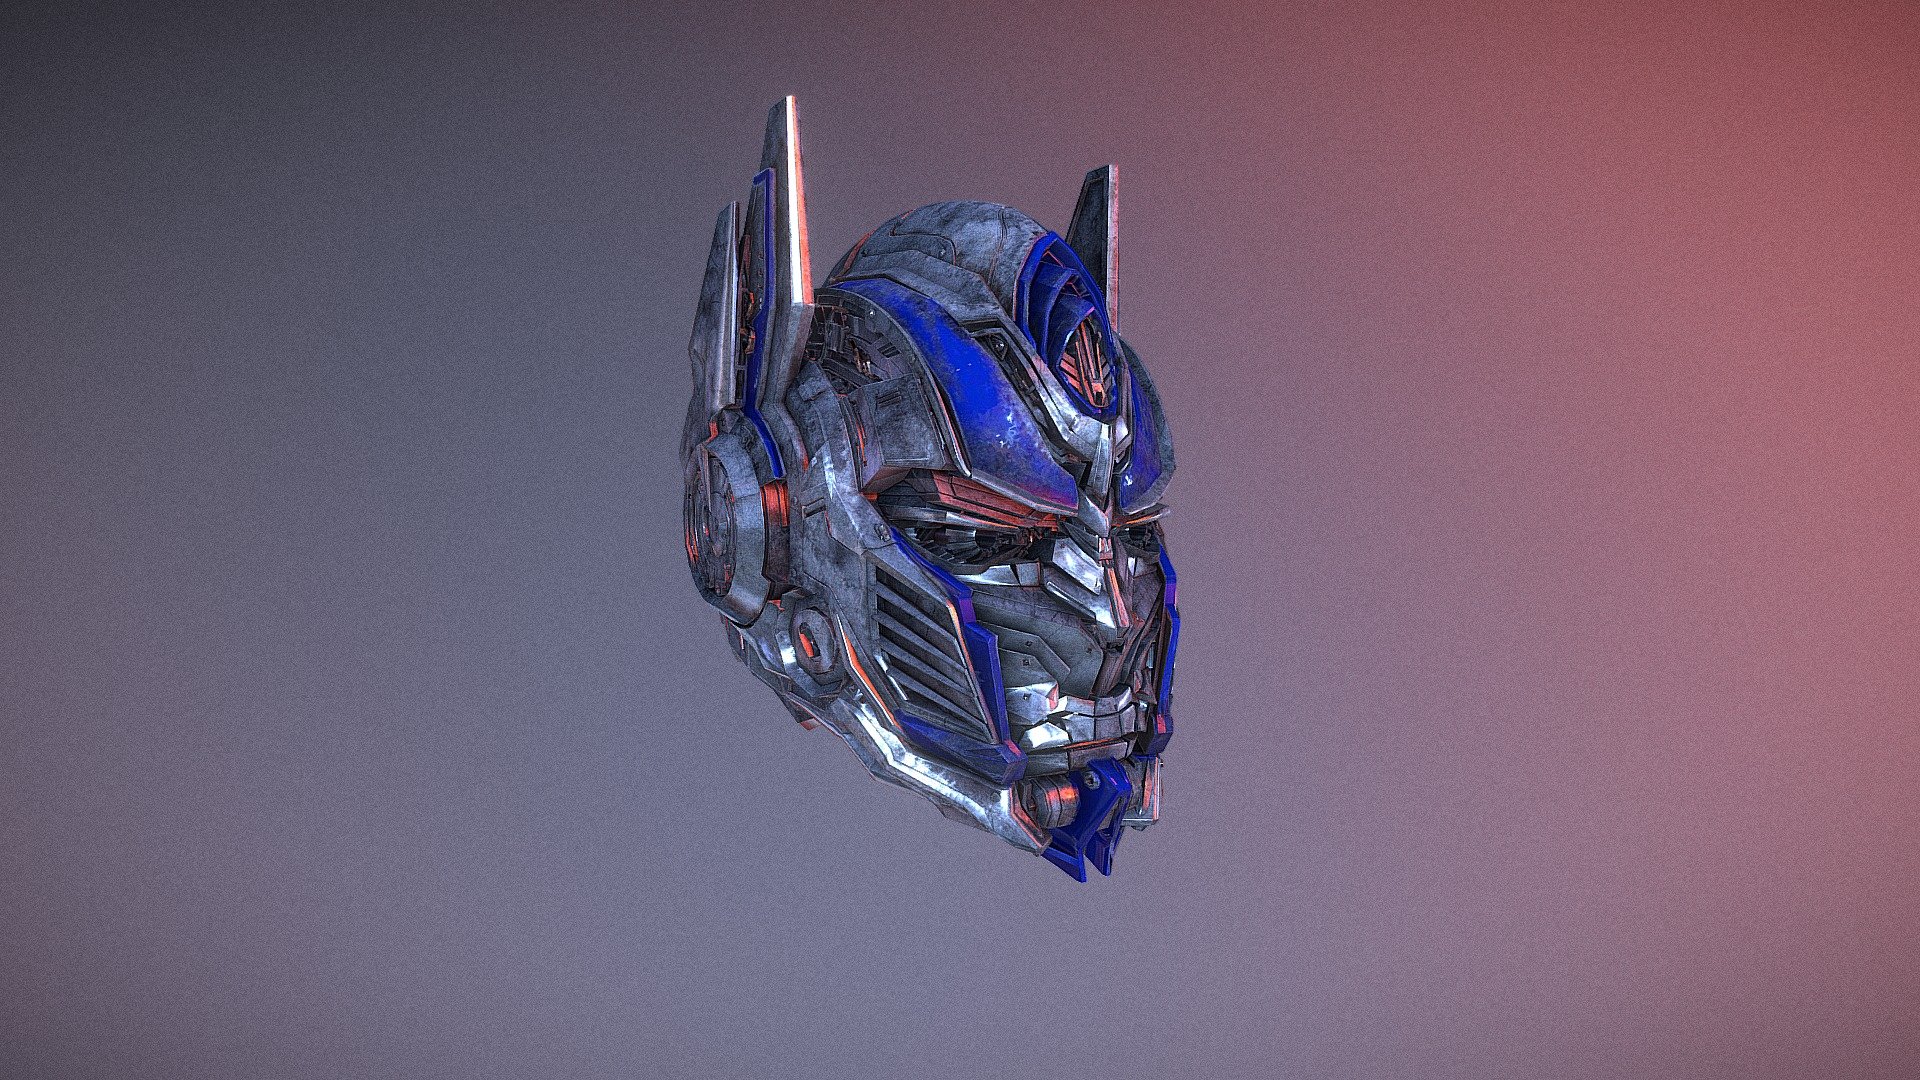 Transformers: The Last Knight
Optimus Prim toys head
i'm printing it to replace my DMK03's head,but that's not enough,
and then， I replace all of armor for DMK03 - Optimus Prime - 3D model by zhaoleafage 3d model